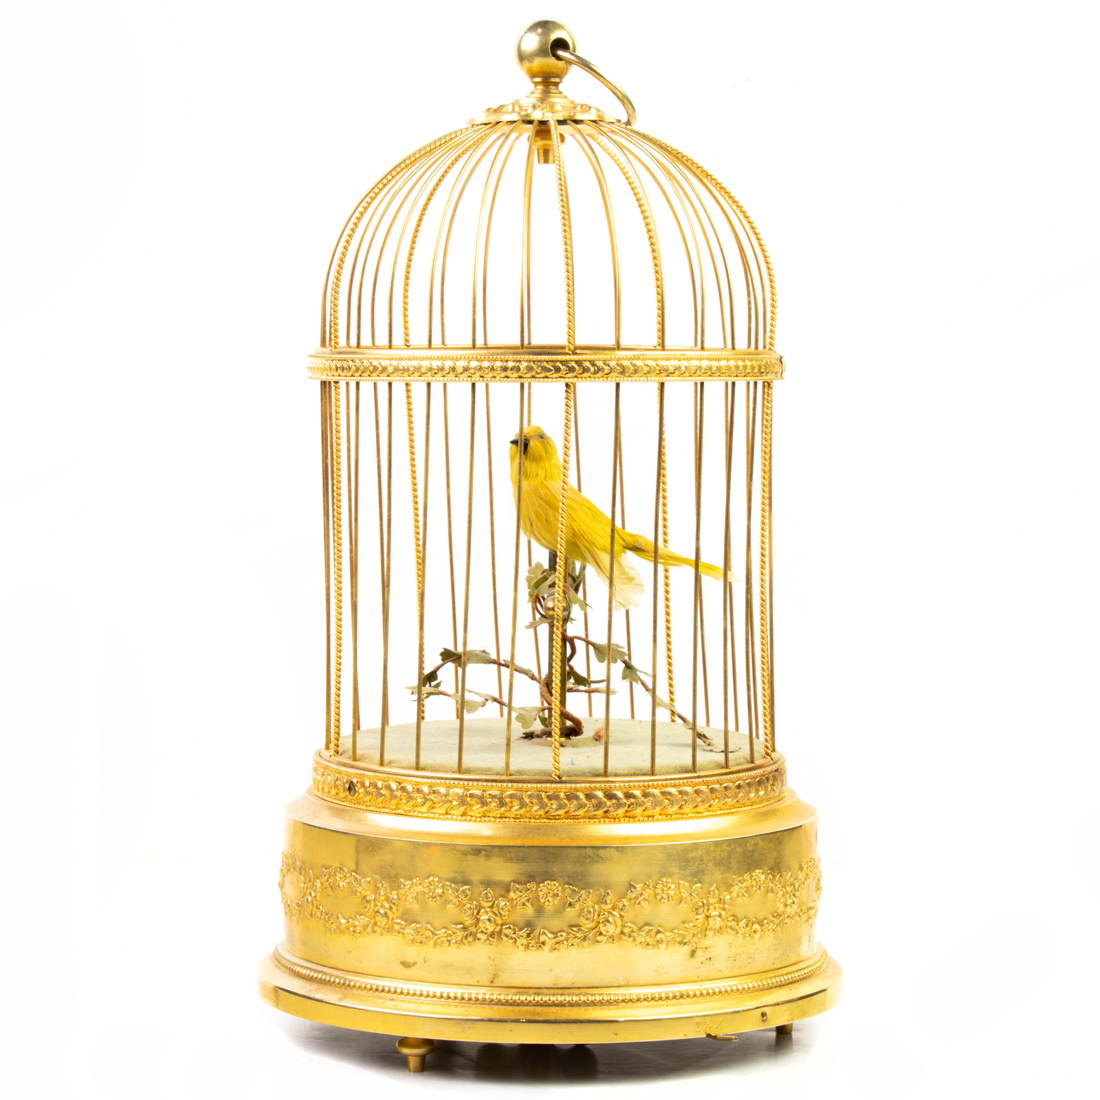 A FRENCH SINGING BIRD IN CAGE AUTOMATON,